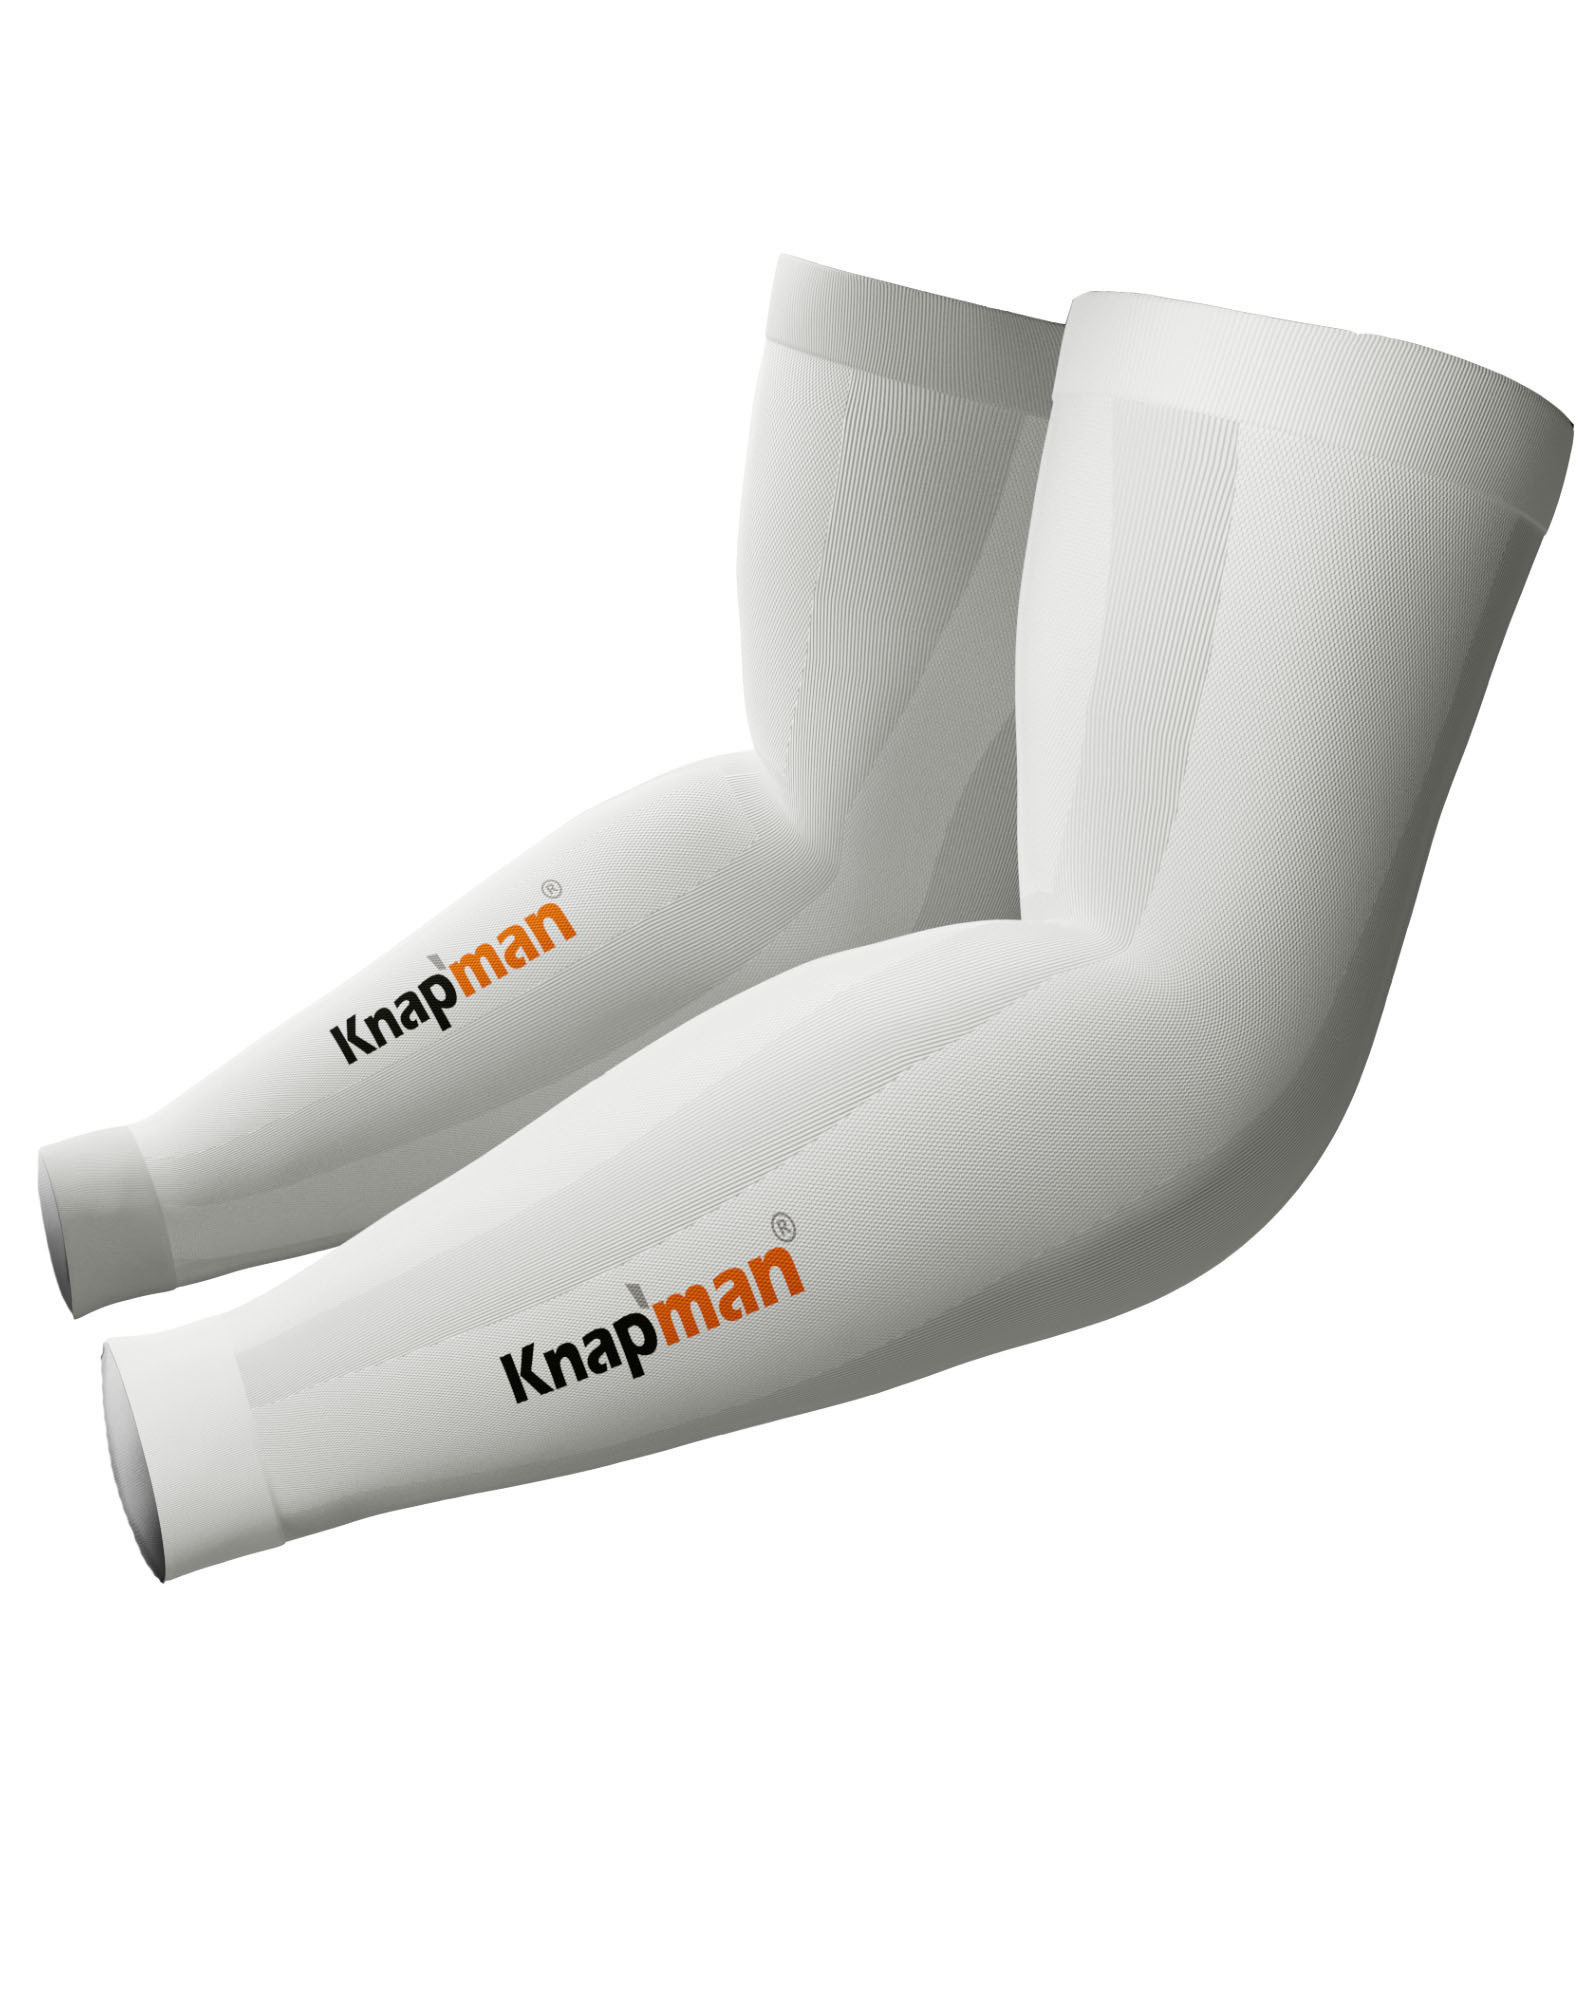 Knapman Womens Zoned Compression Arm Sleeves 45% White